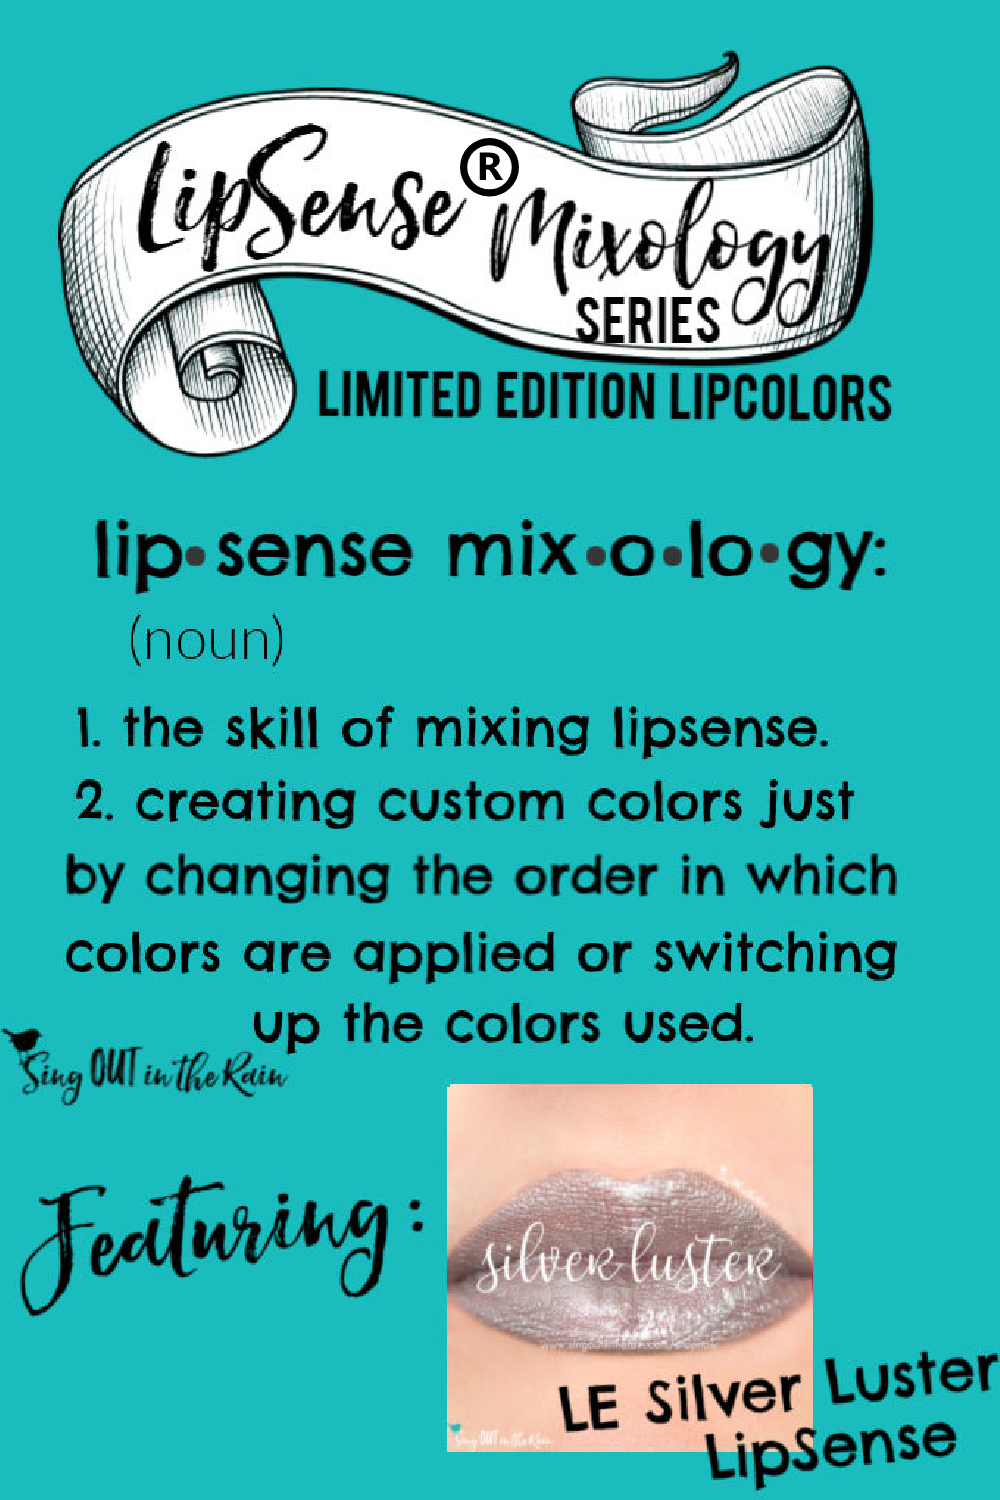 The Ultimate Guide to Silver Luster LipSense Mixology